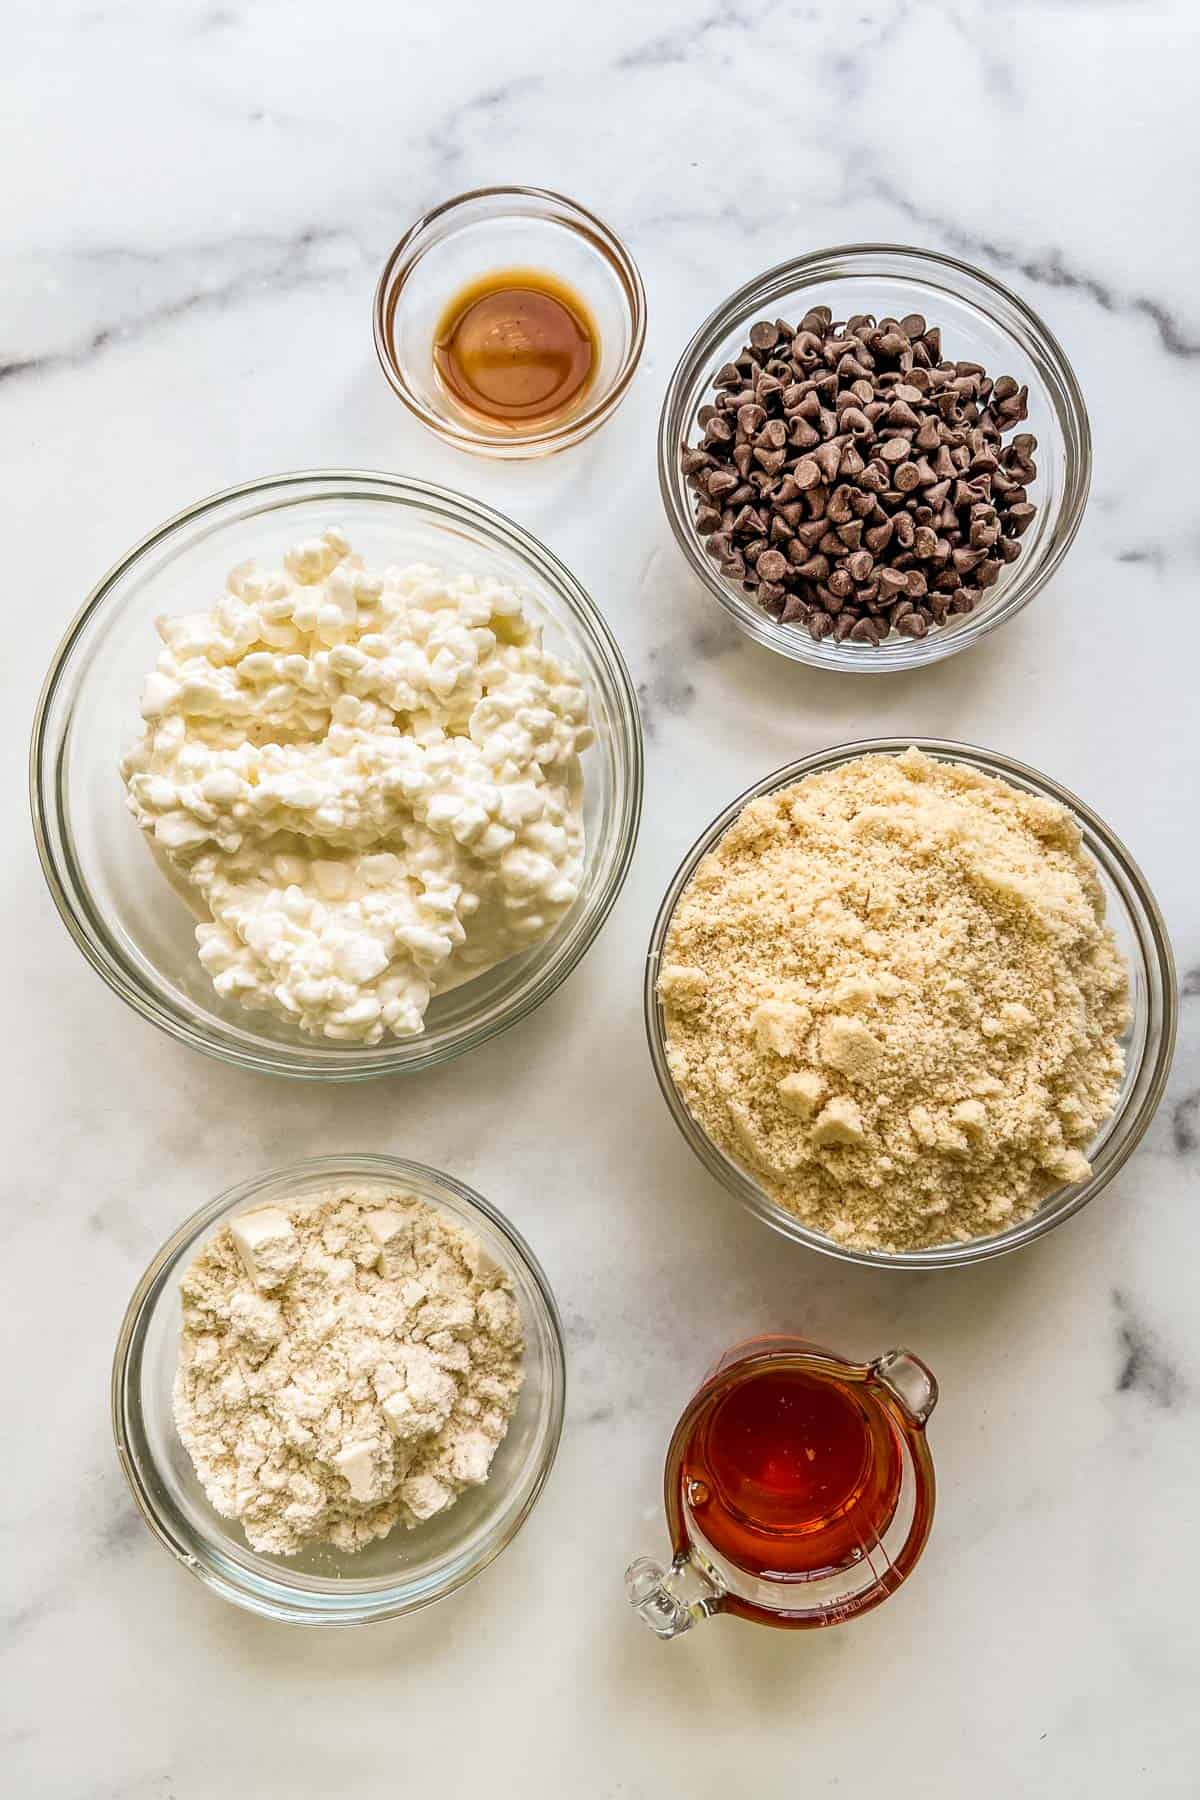 Ingredients for cottage cheese cookie dough in glass bowls.